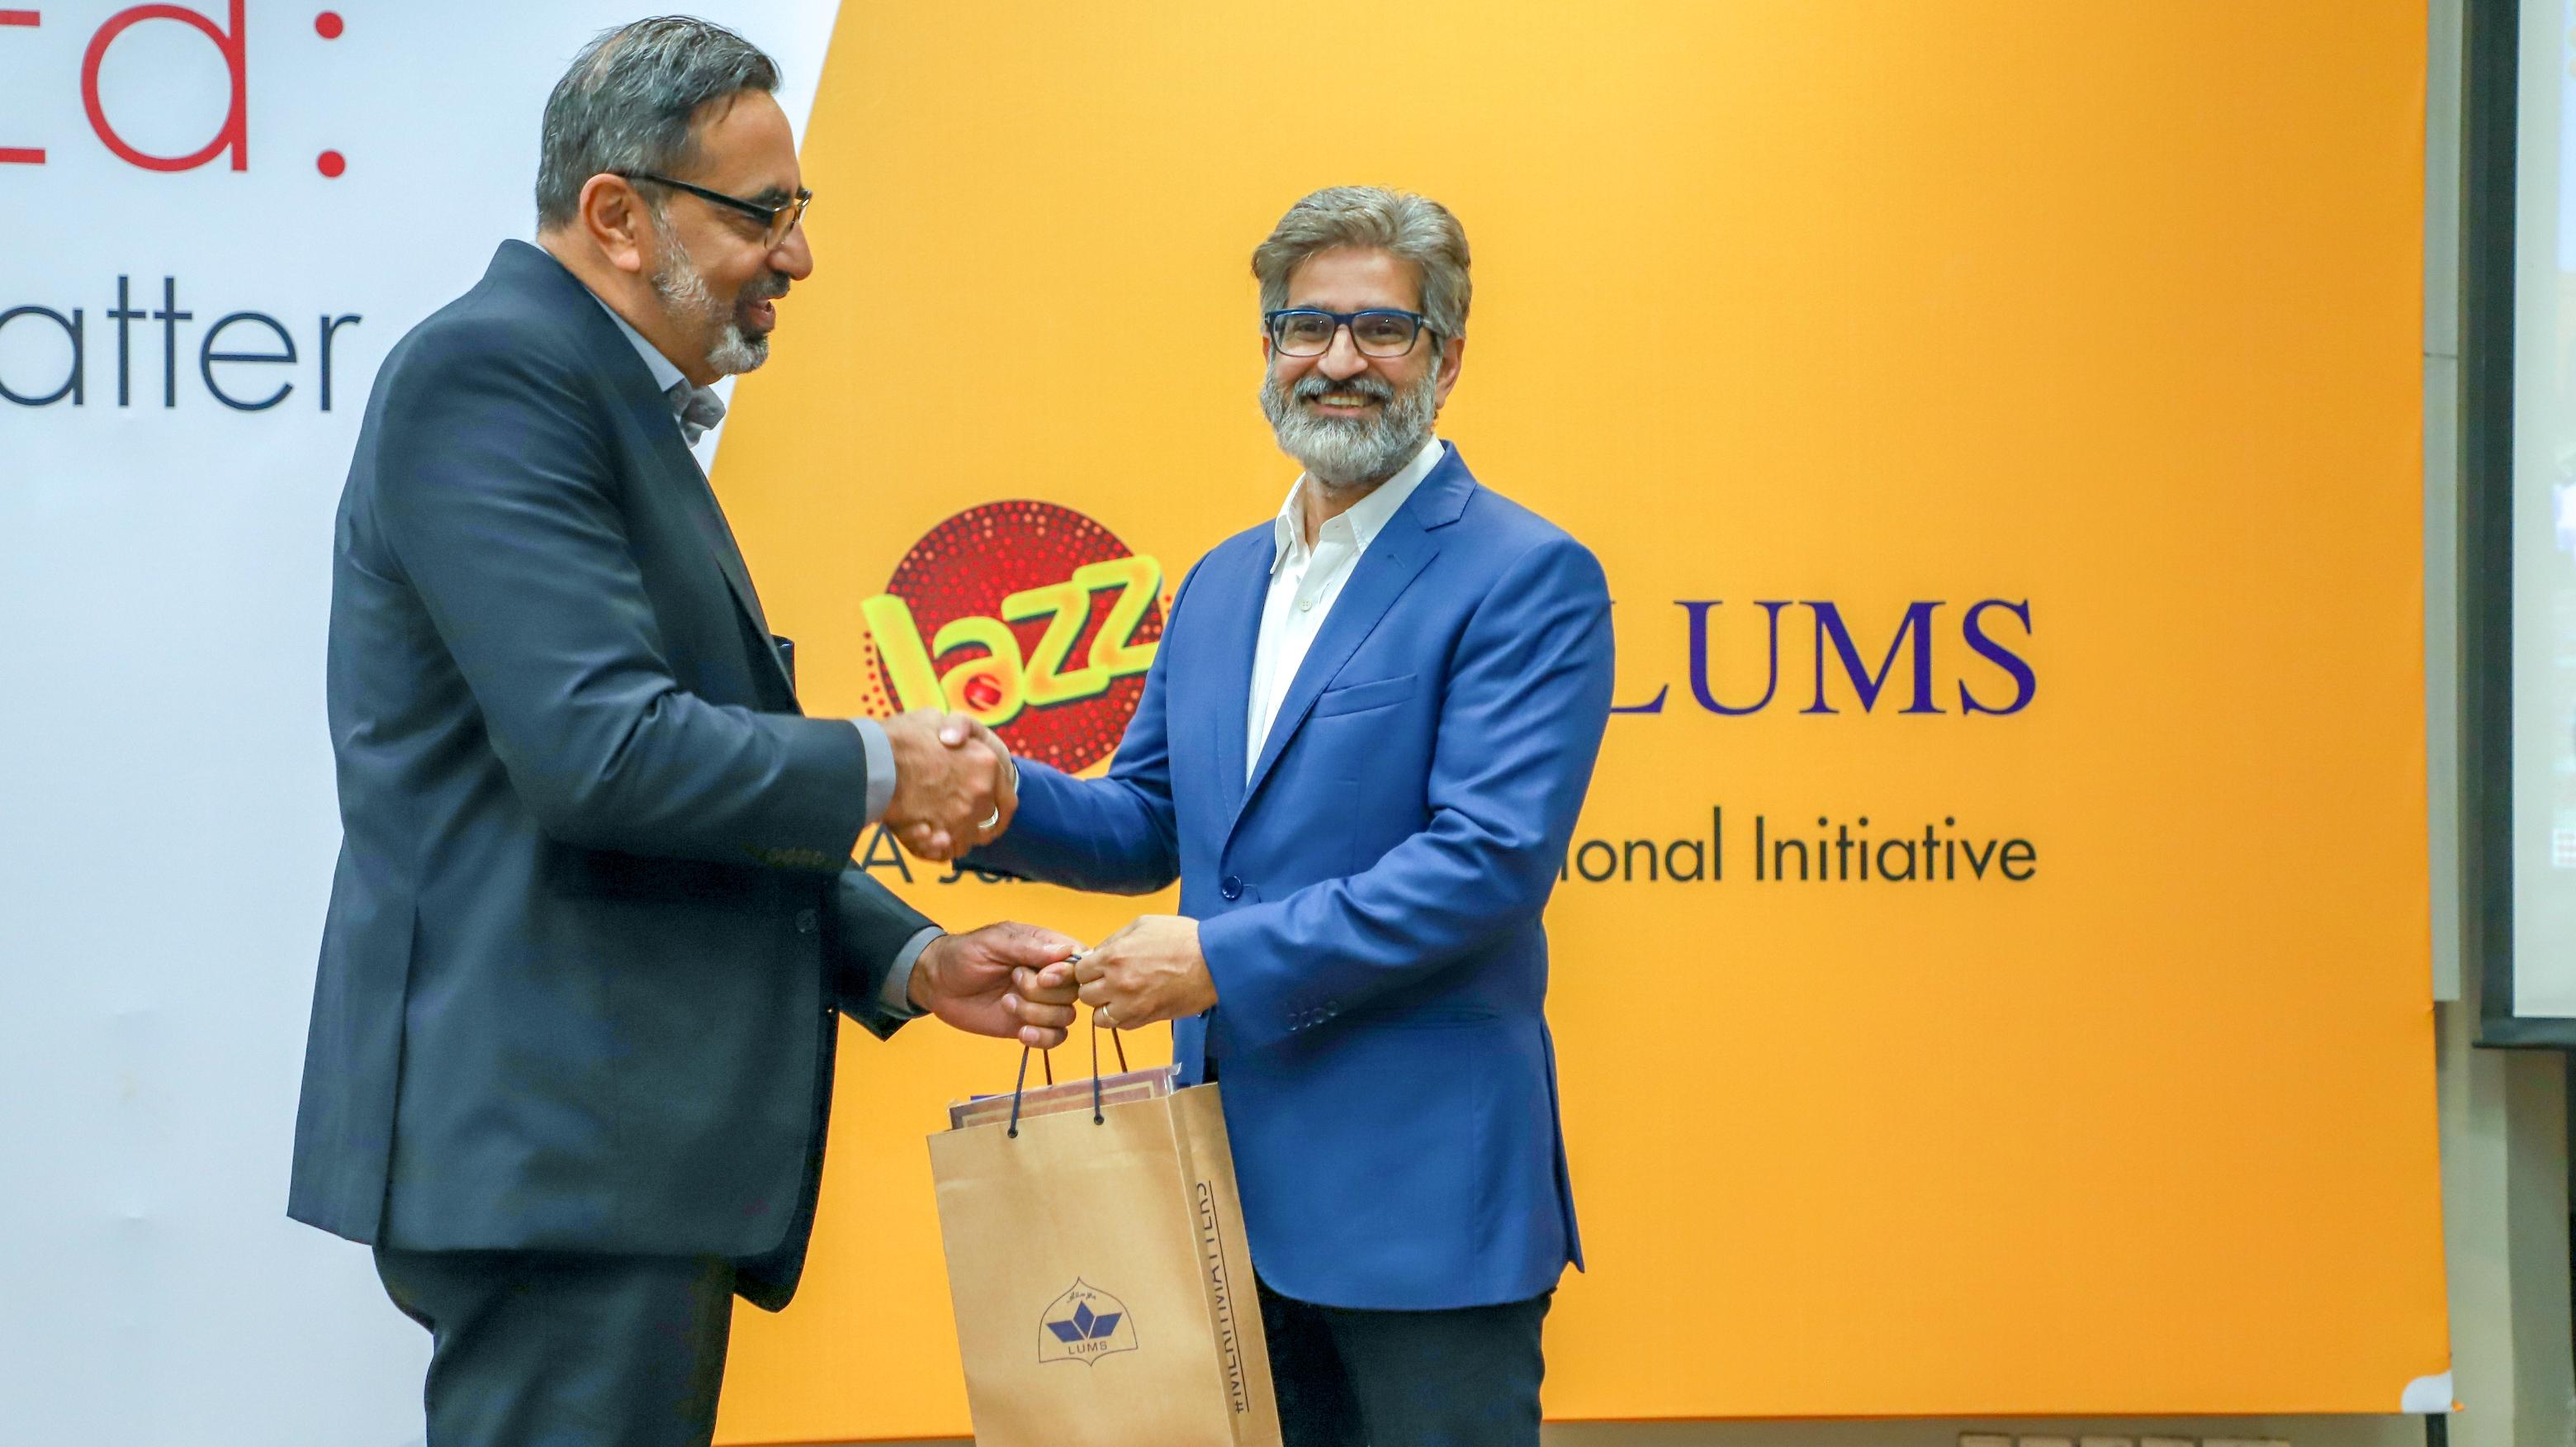 DisruptEd: Ideas that matter – LUMS and Jazz Join Hands for National Initiative